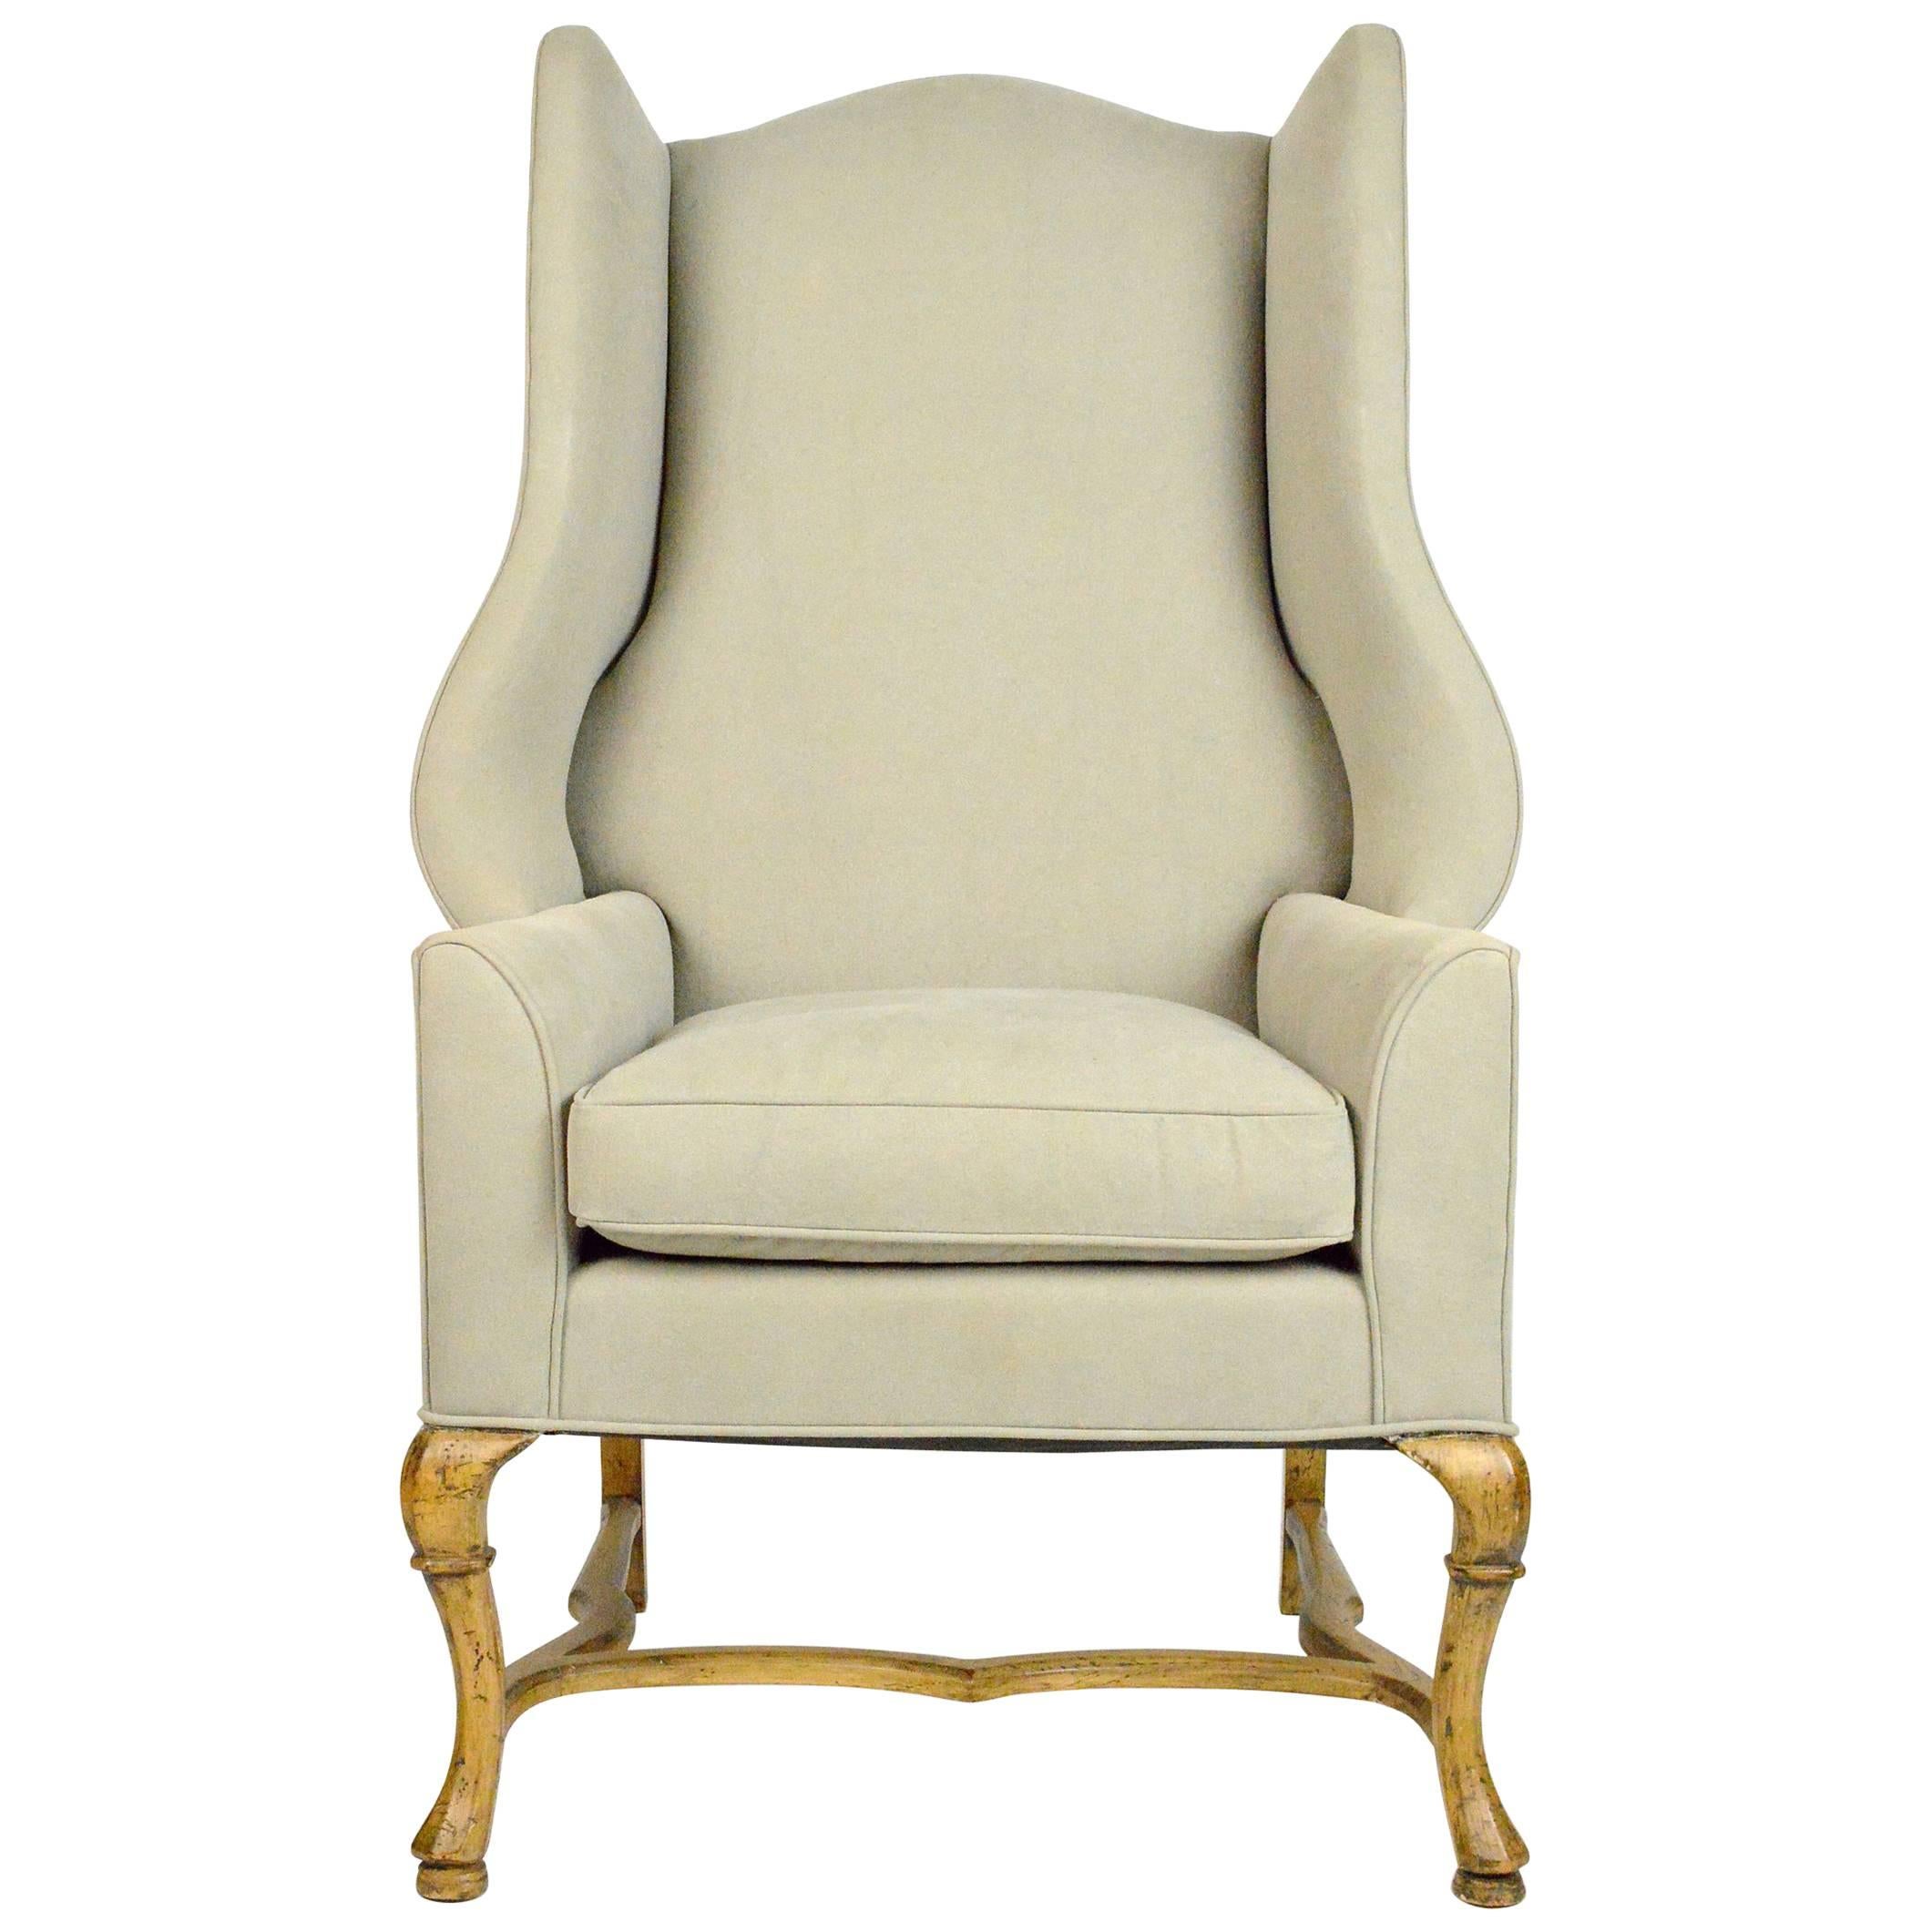 Large-Scale French Country Style Wingback Chair For Sale